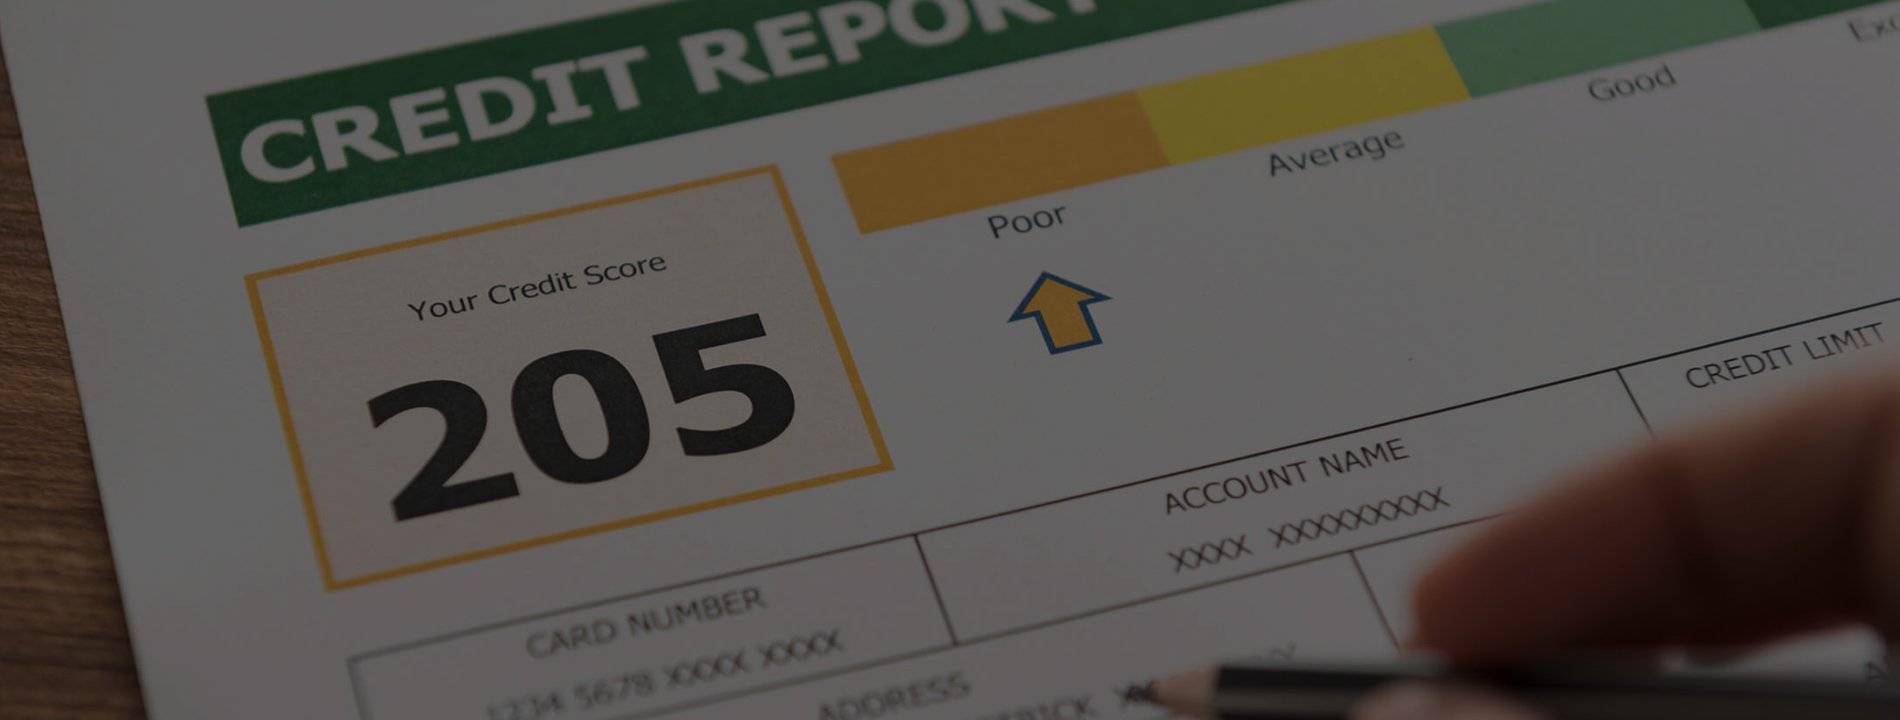 How to Get A Loan With Bad Credit Score?